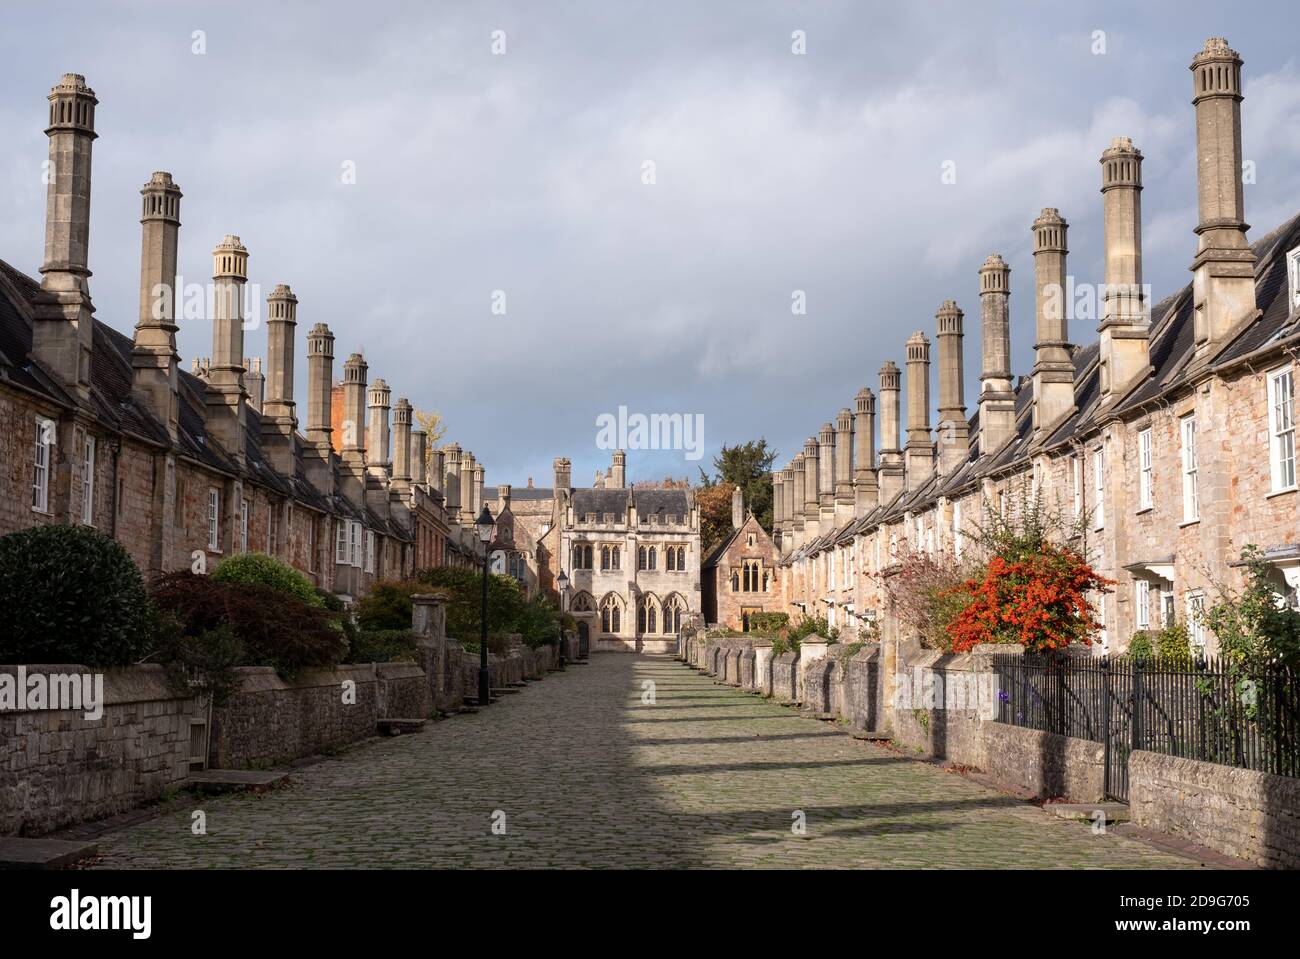 Vicars' Close, in Wells, Somerset, UK. Street of medieval terraced houses with iconic chimneys the Cathedral. Buildings once housed the Vicars Choral. Stock Photo